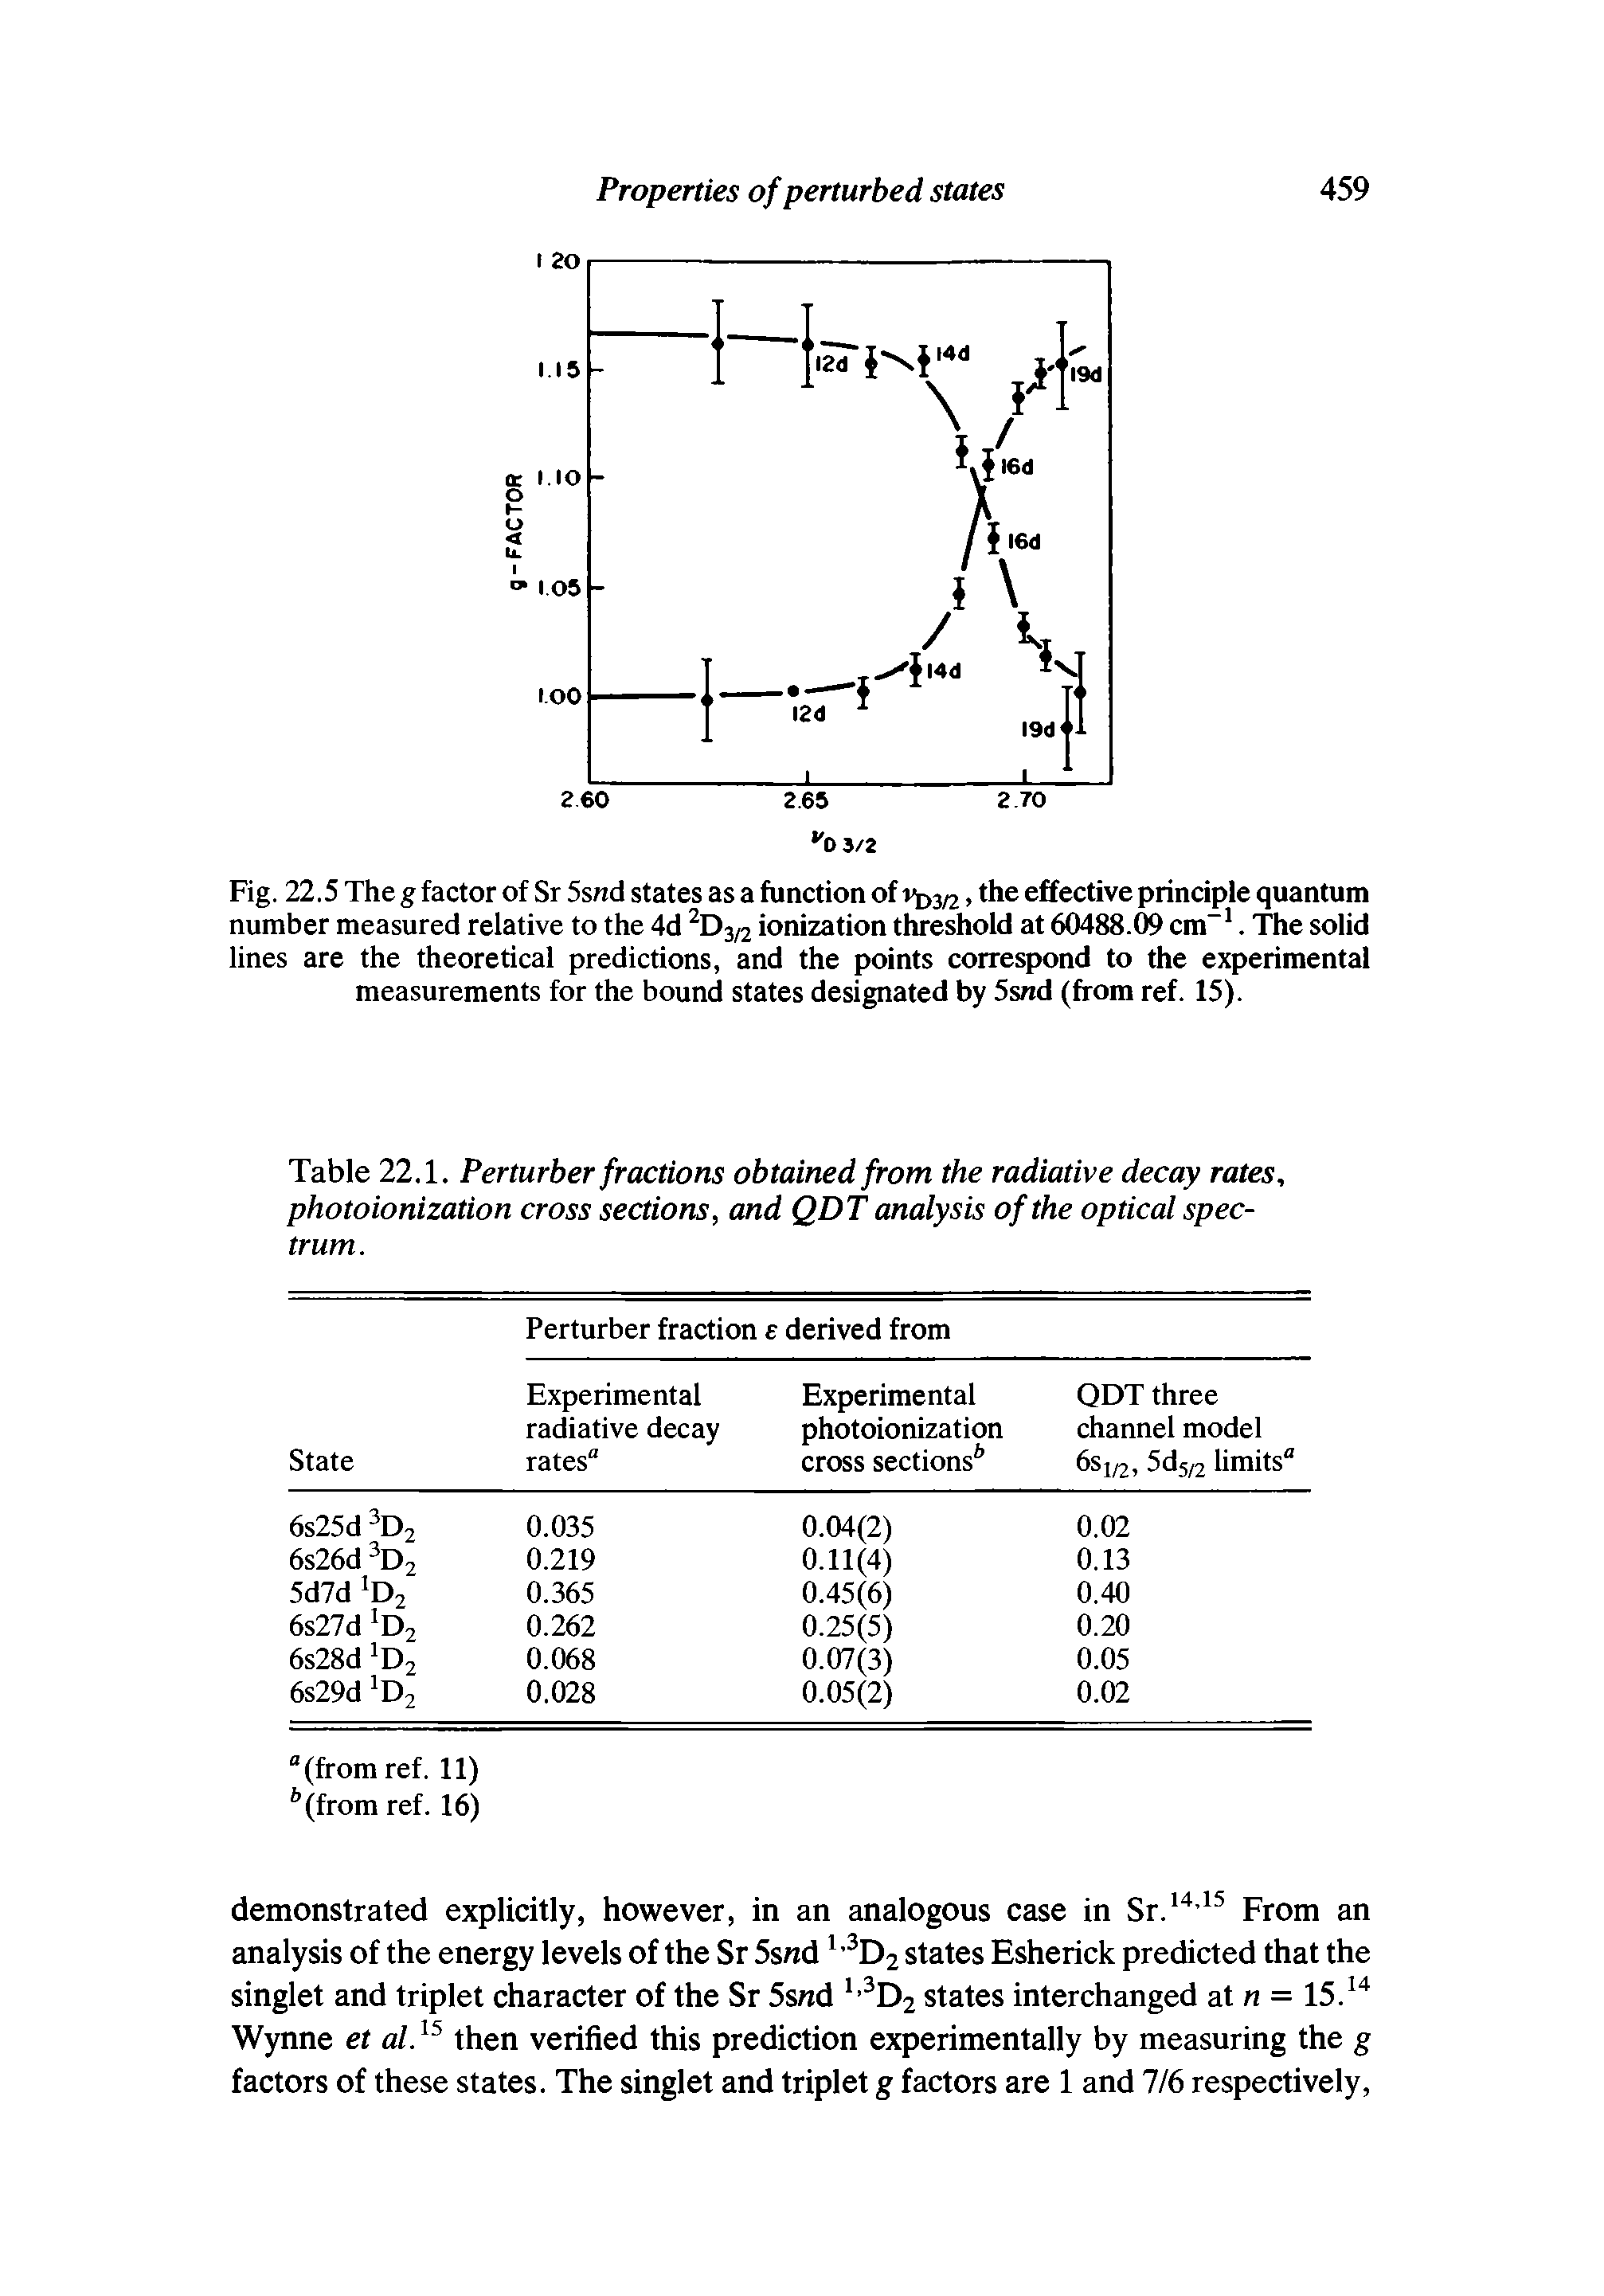 Table 22.1. Perturber fractions obtained from the radiative decay rates, photoionization cross sections, and QDT analysis of the optical spectrum.